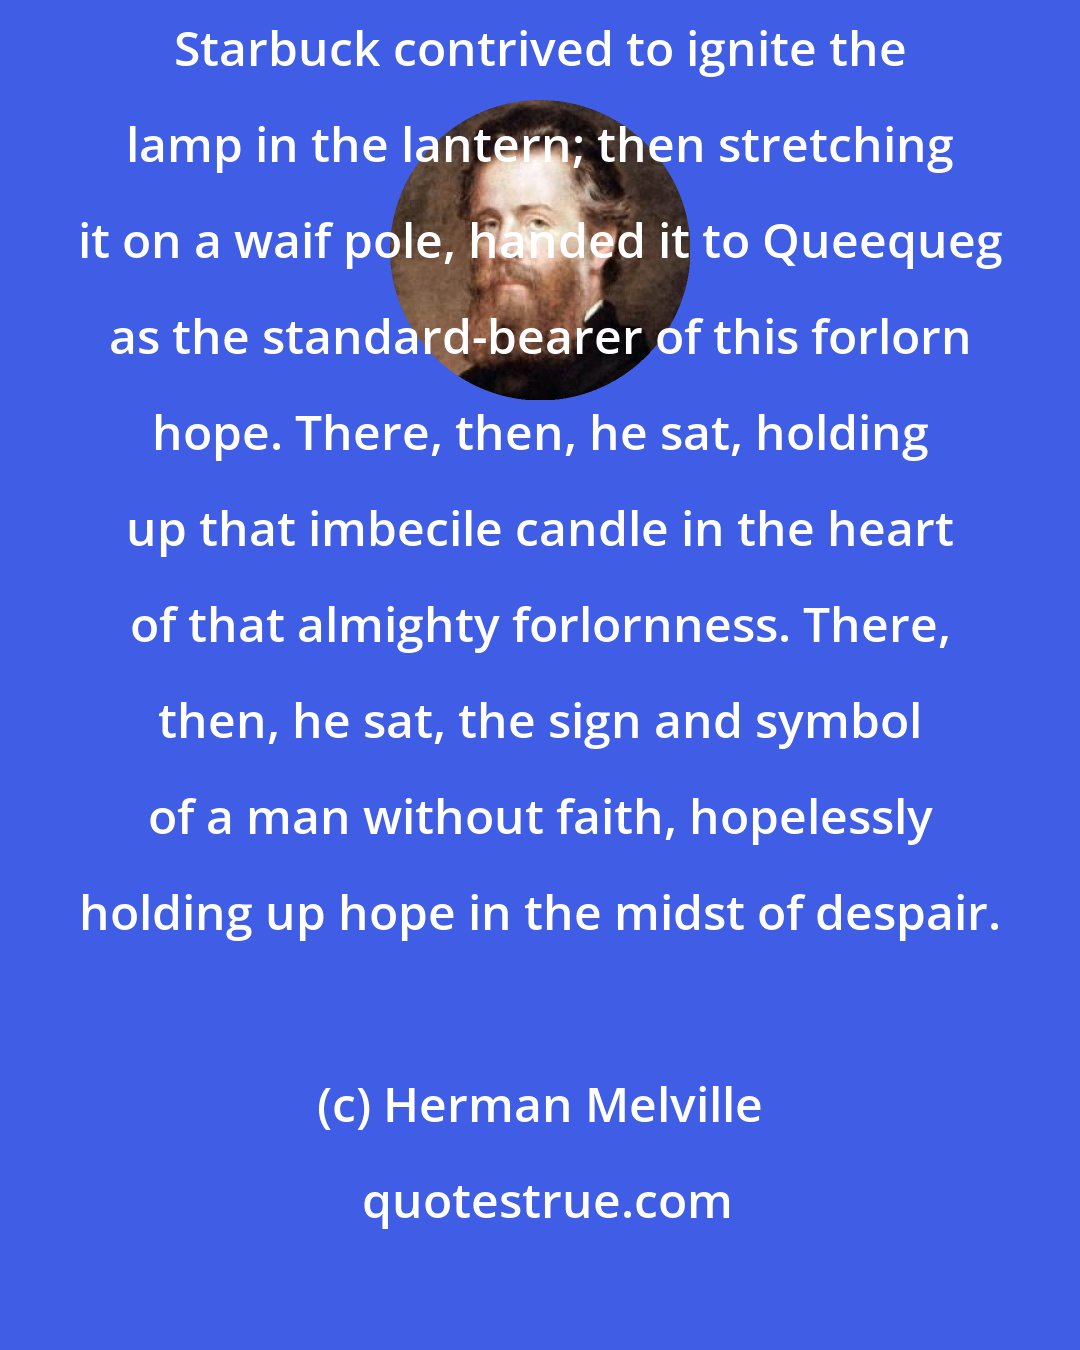 Herman Melville: So, cutting the lashing of the waterproof match keg, after many failures Starbuck contrived to ignite the lamp in the lantern; then stretching it on a waif pole, handed it to Queequeg as the standard-bearer of this forlorn hope. There, then, he sat, holding up that imbecile candle in the heart of that almighty forlornness. There, then, he sat, the sign and symbol of a man without faith, hopelessly holding up hope in the midst of despair.